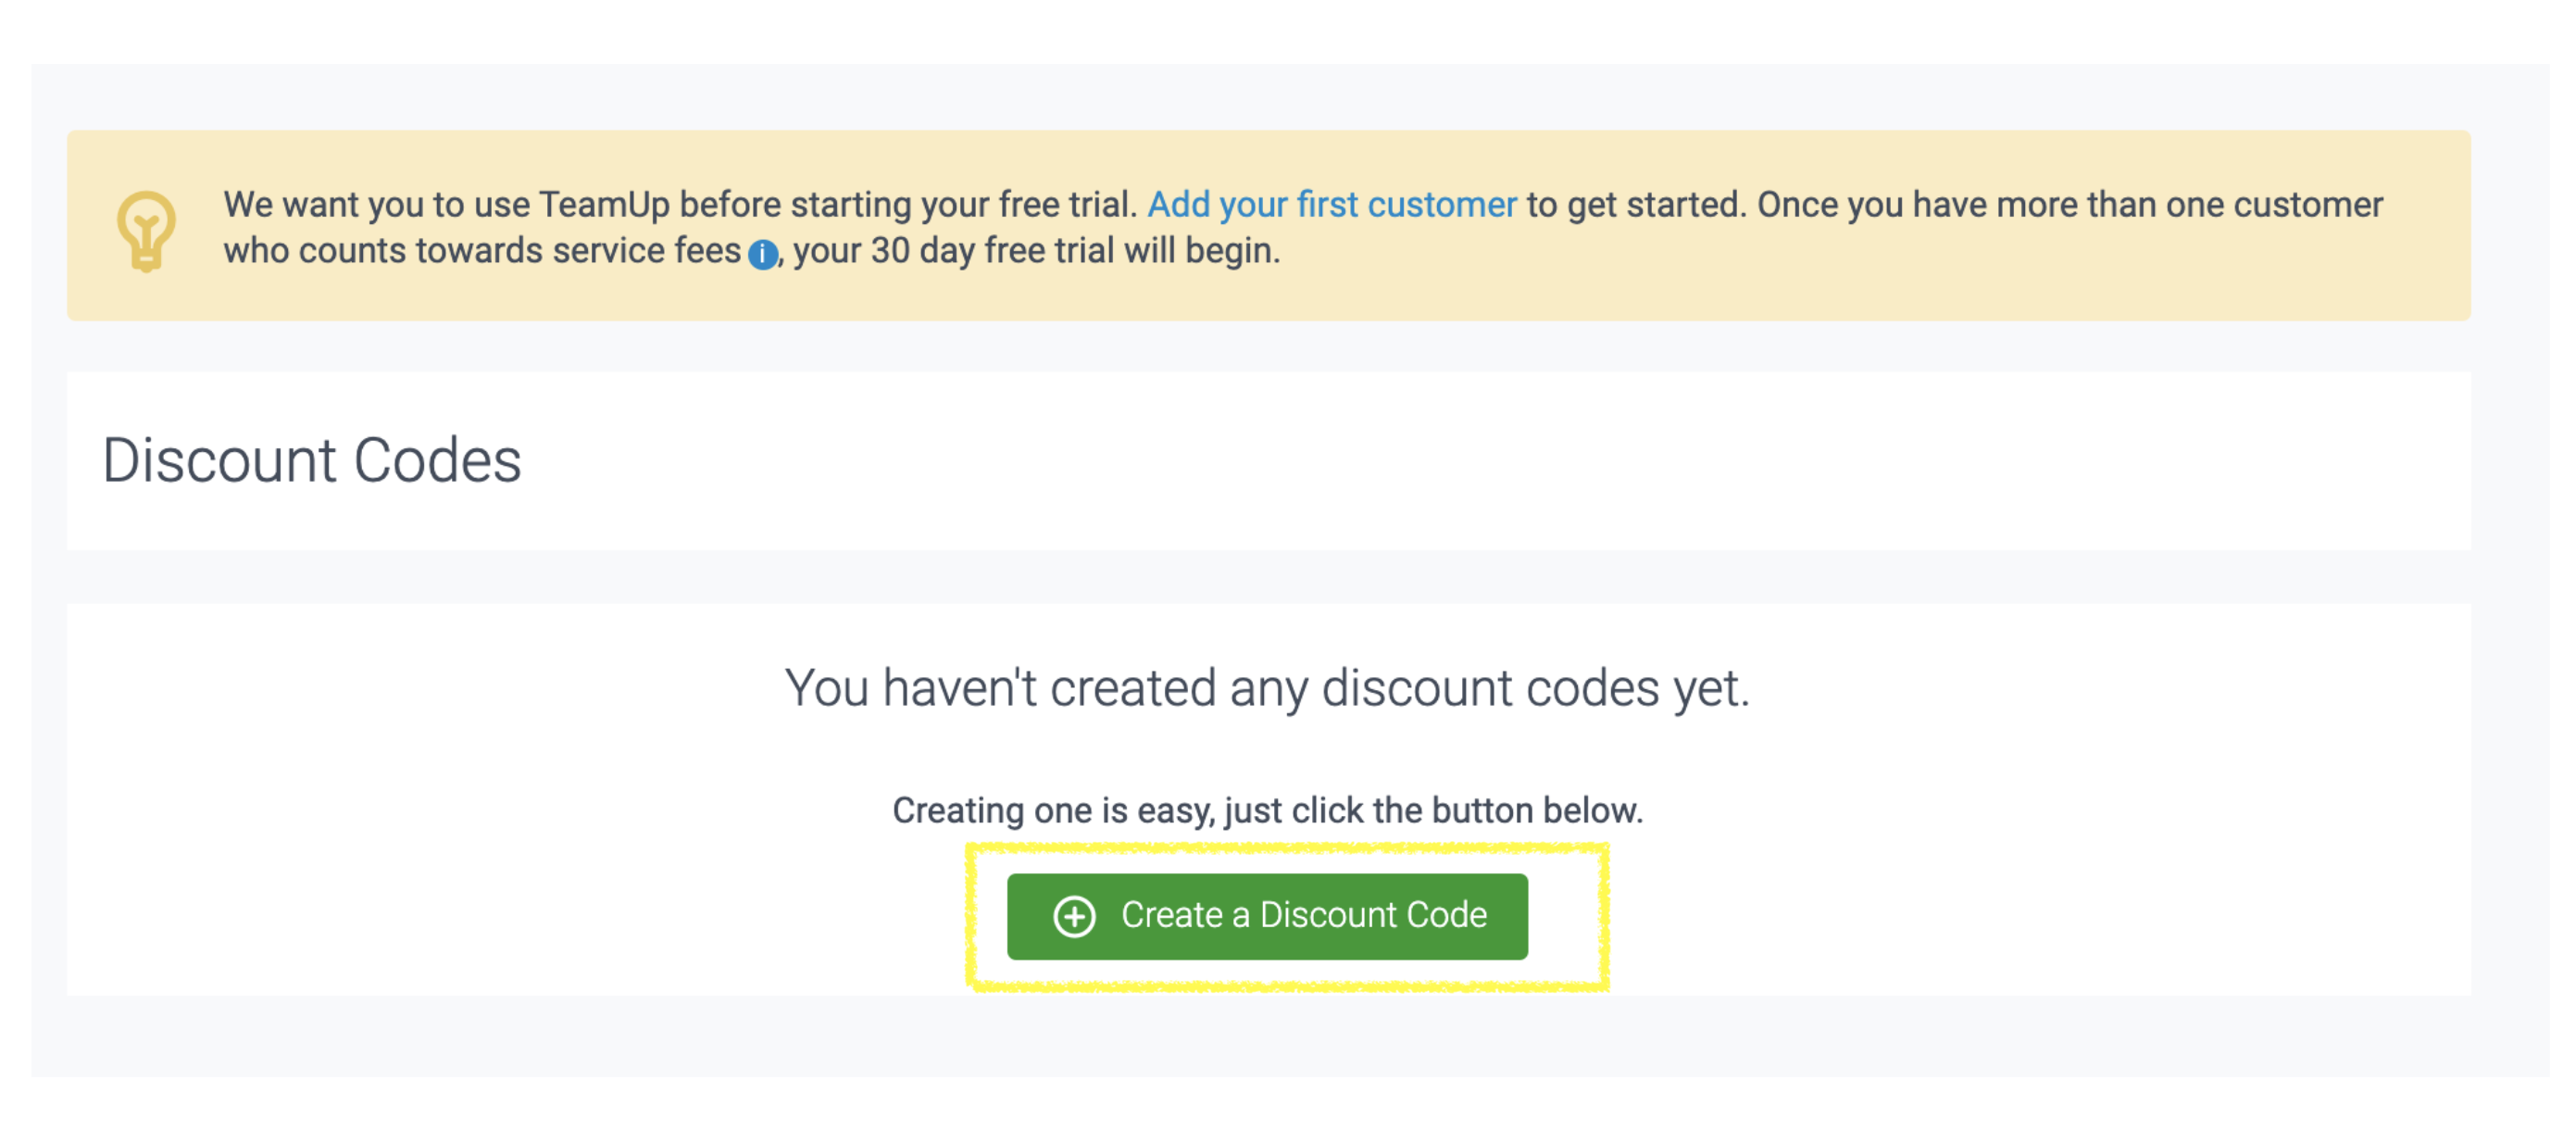 TeamUp discount code create form.